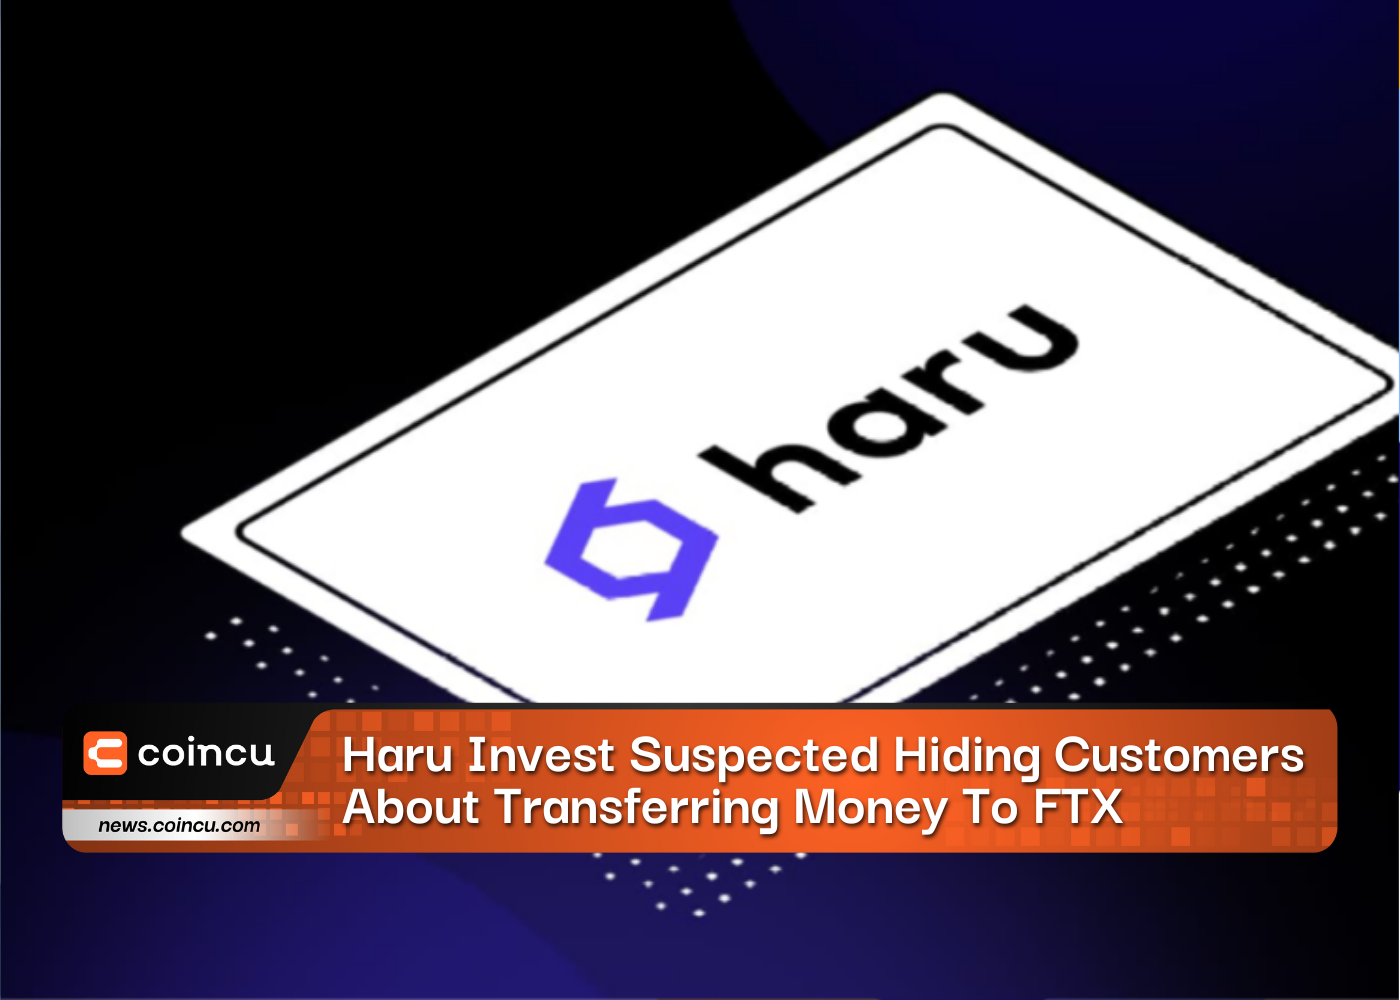 Haru Invest Suspected Hiding Customers About Transferring Money To FTX